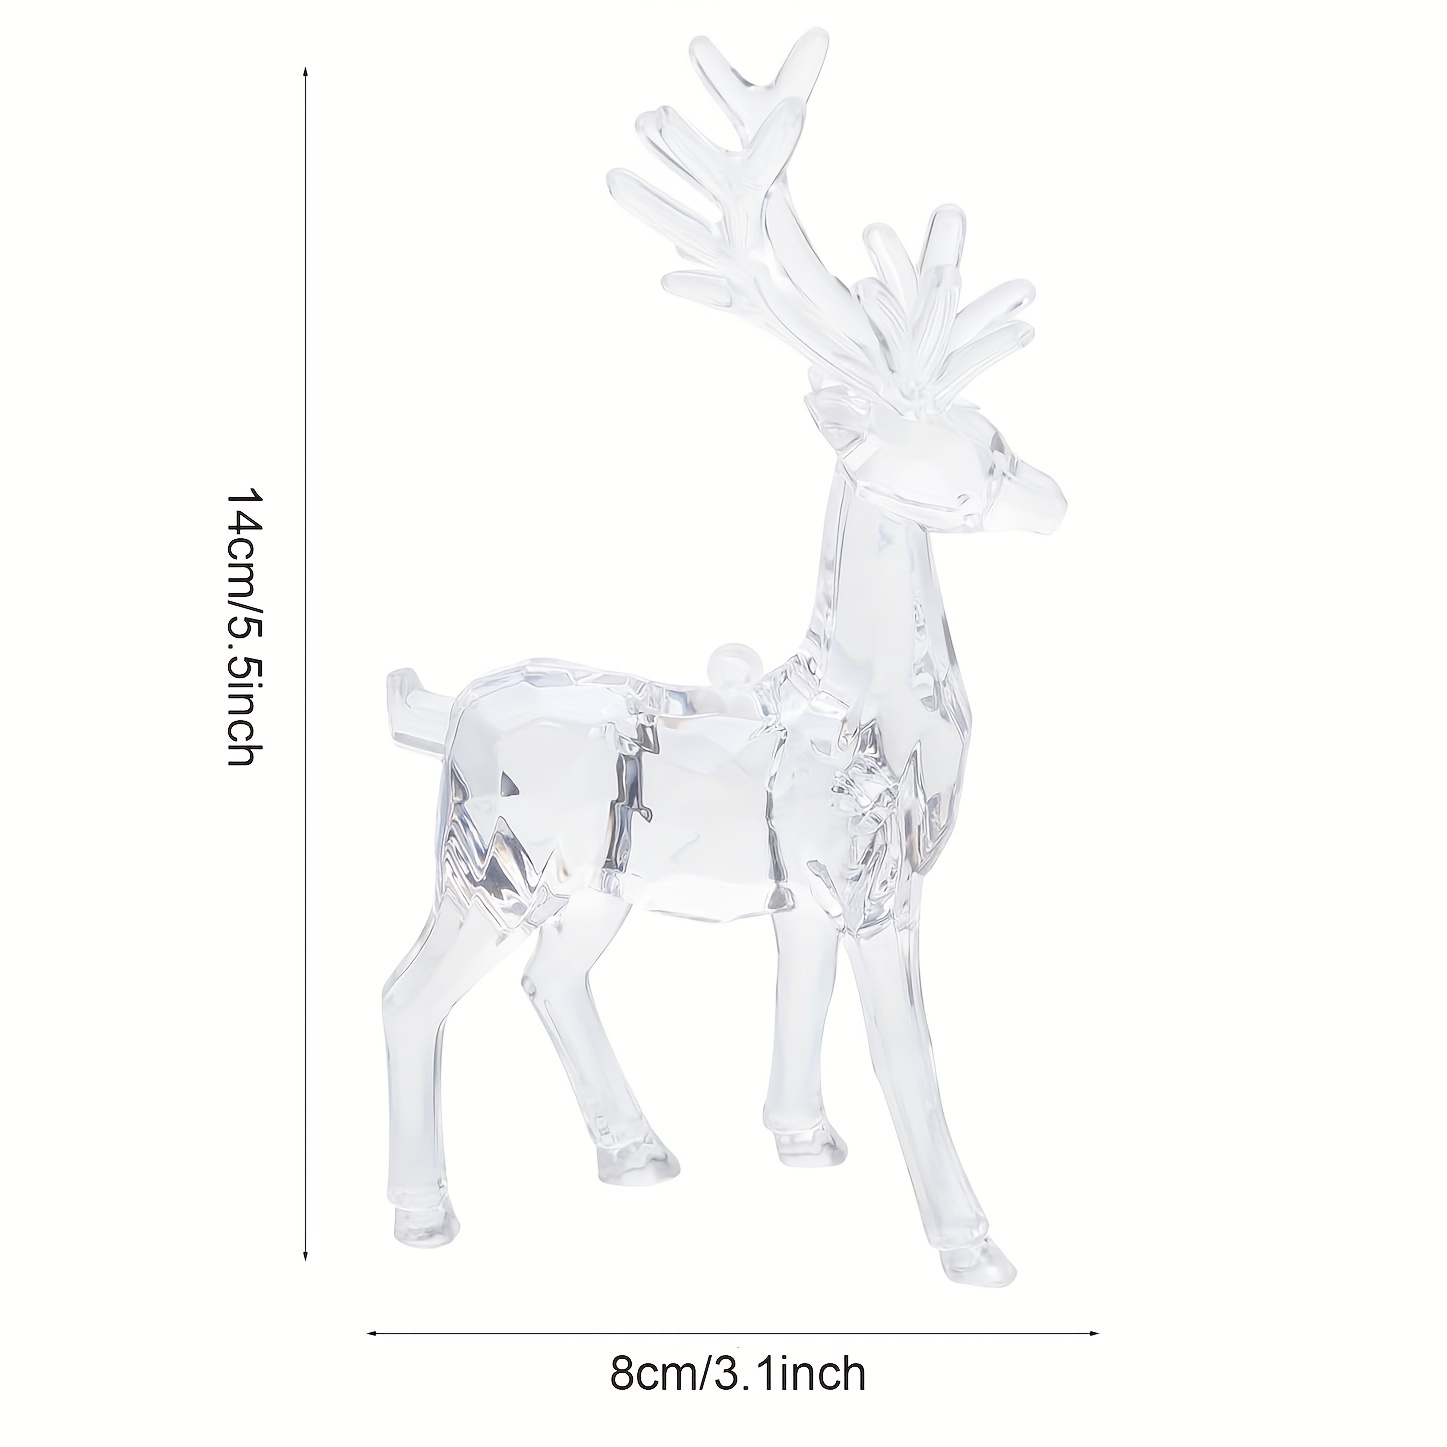 Christmas Reindeer Art Party Kit! At Home Paint Party Supplies